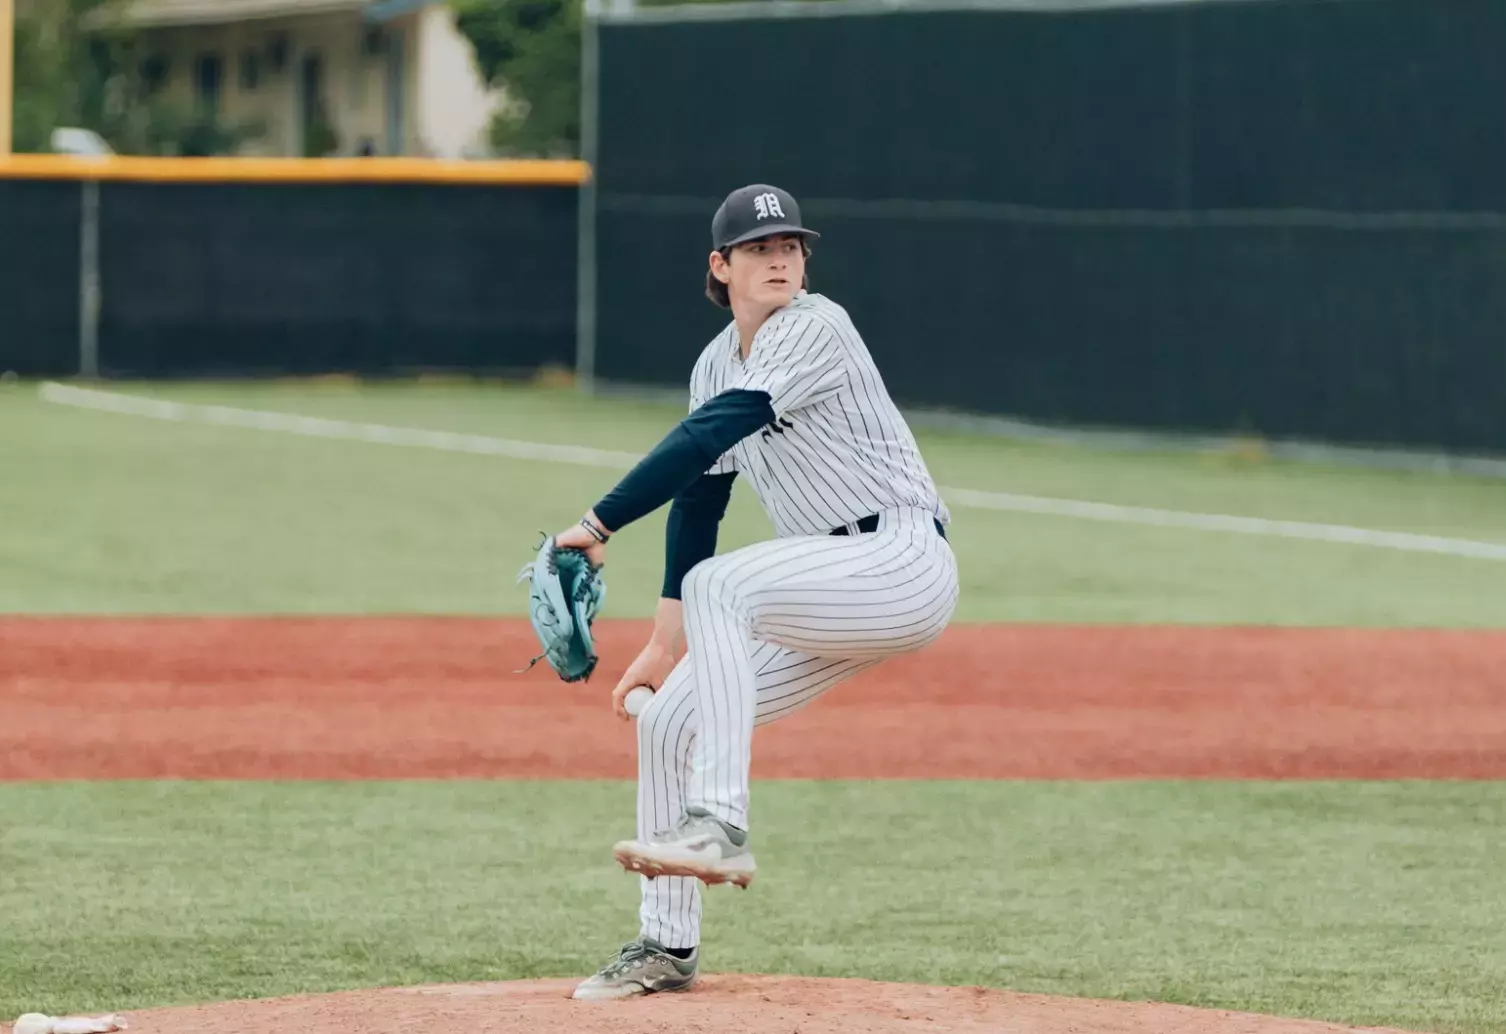 TMU’s Ryan Mathiesen Selected in 14th Round of MLB Draft Featured Image